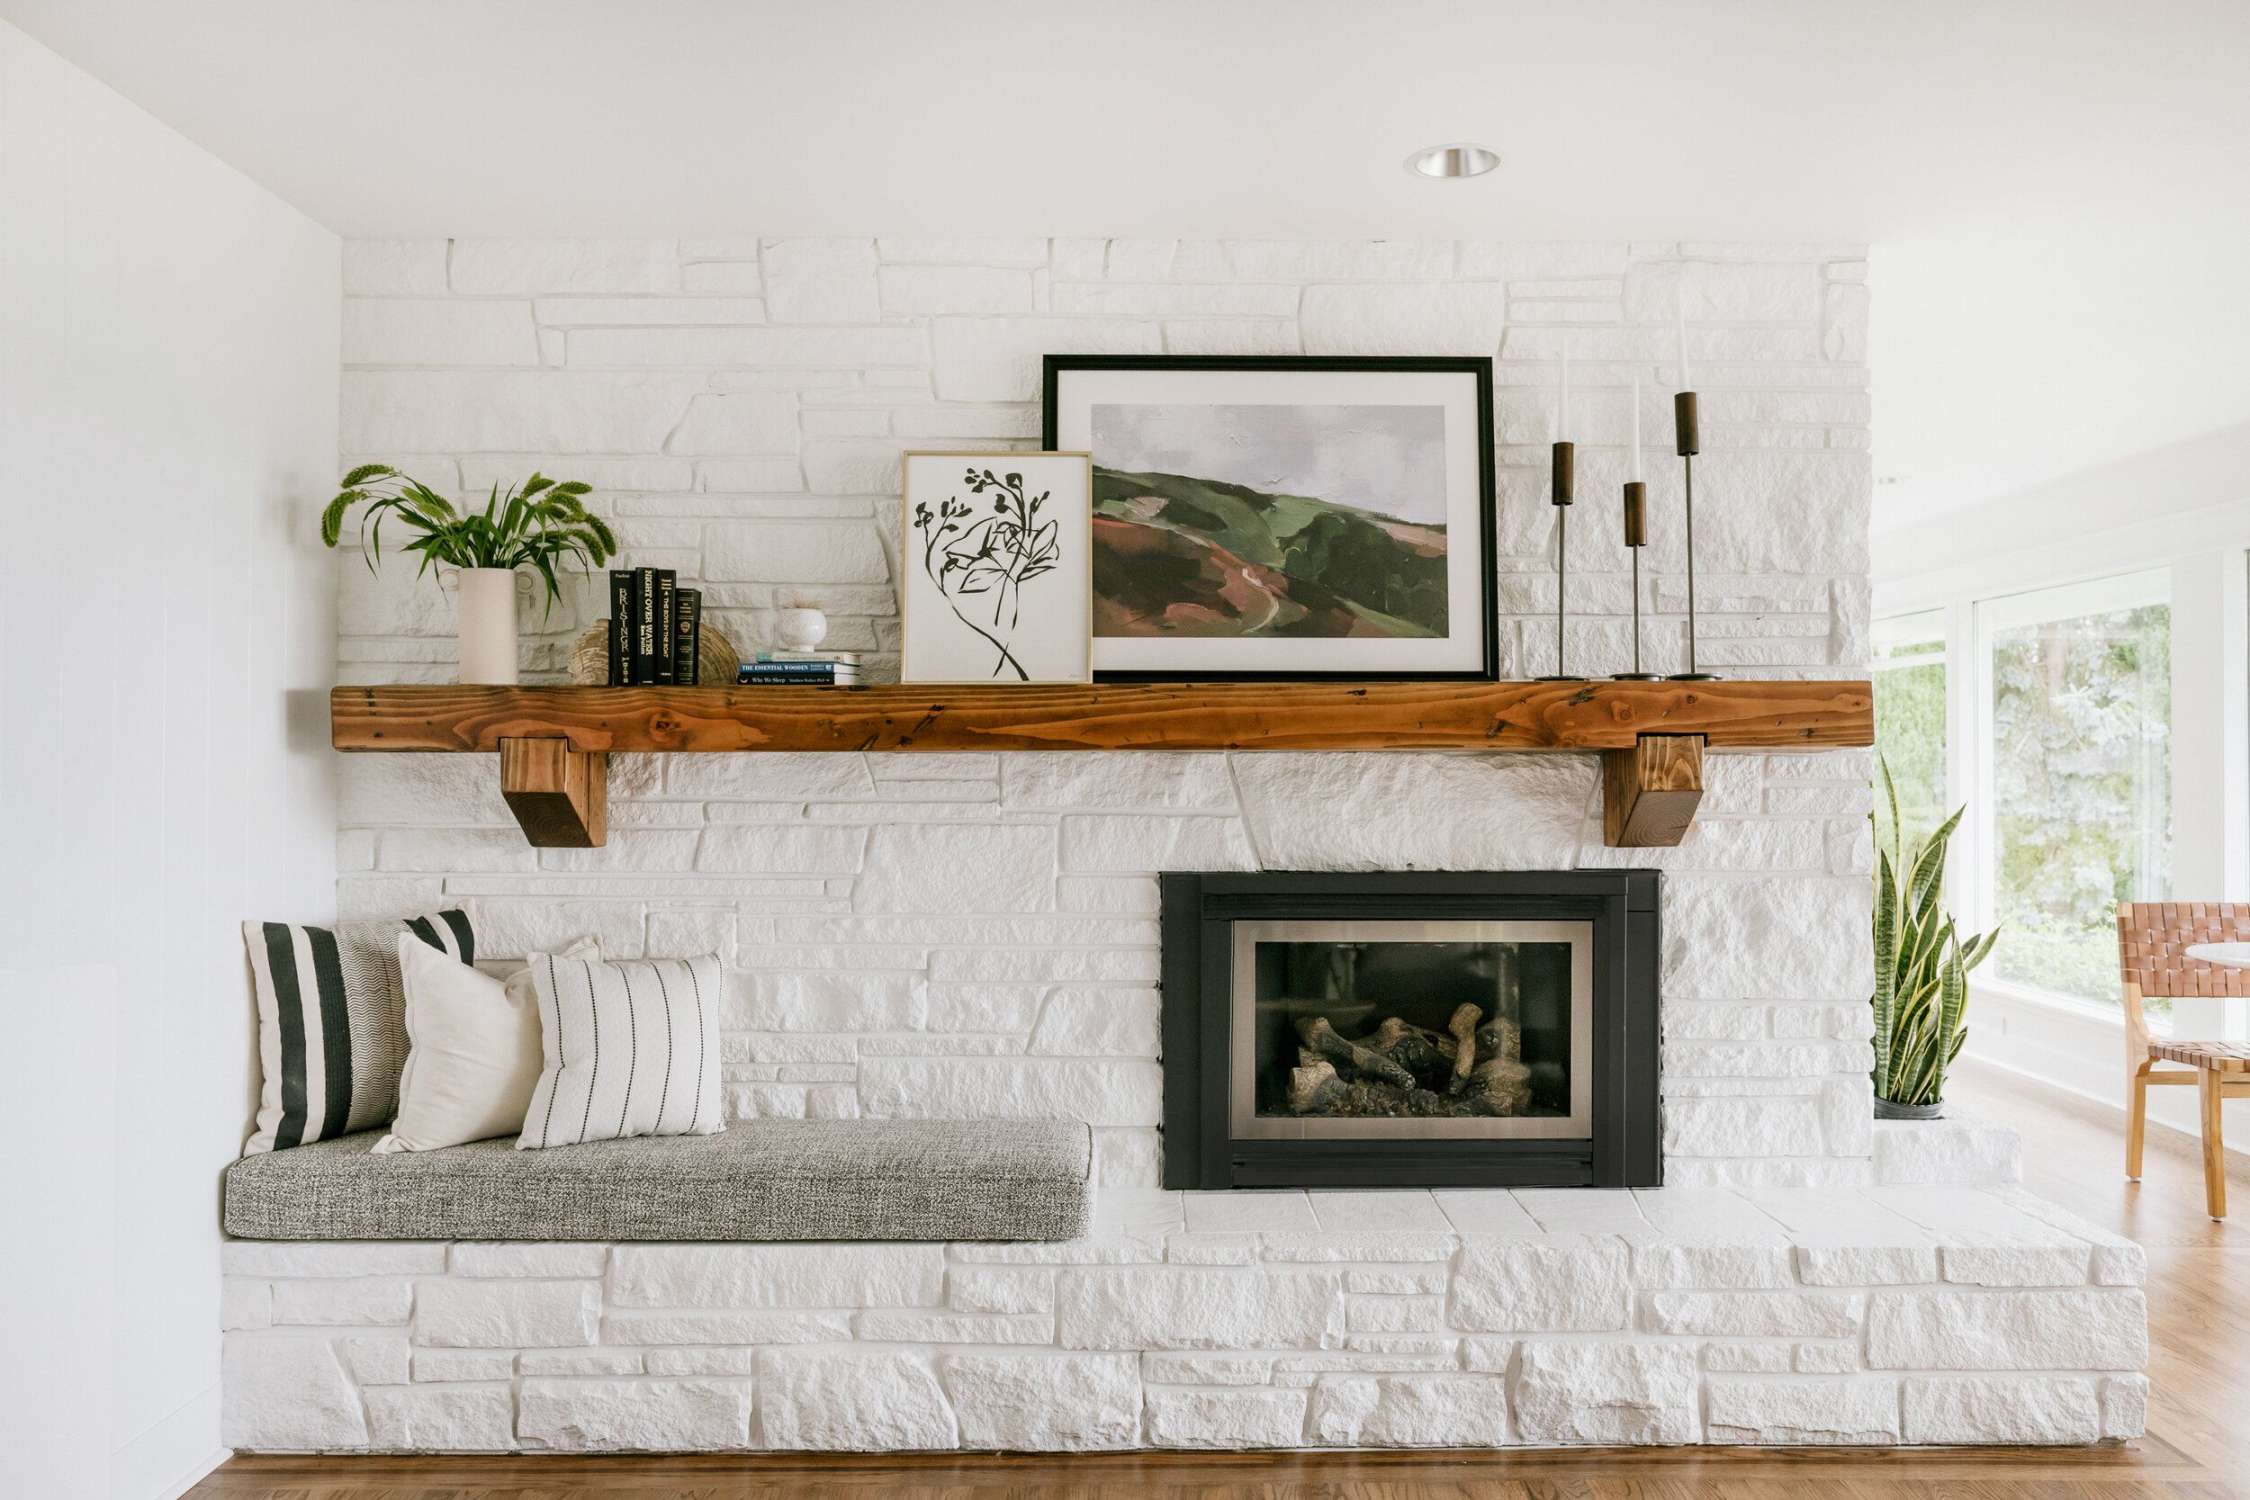 Standout Décor Ideas for Above Your Fireplace